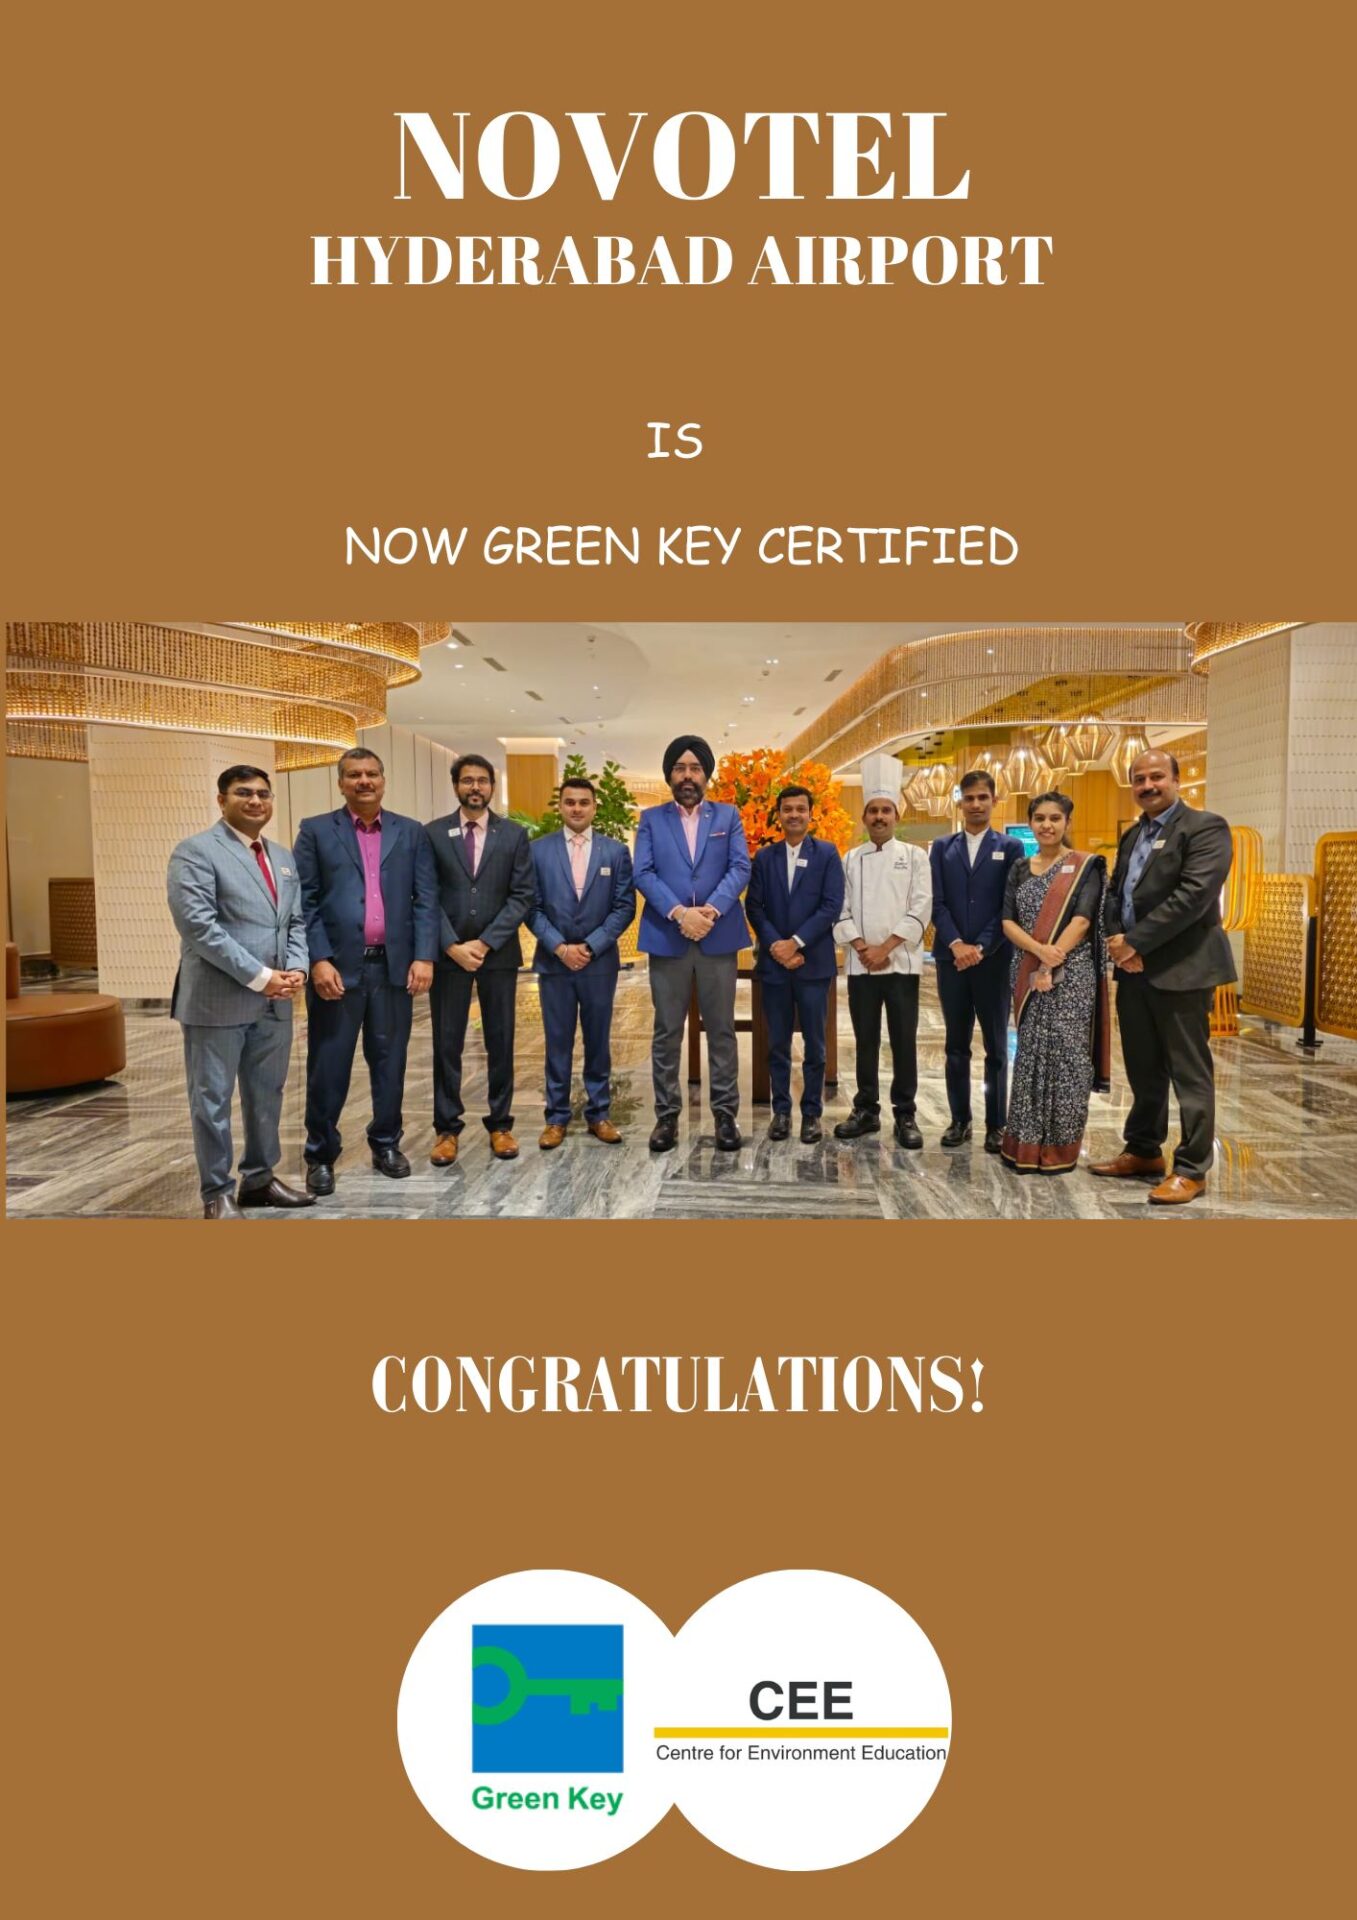 Novotel Hyderabad Airport becomes pioneering hotel in South India to receive the Green Key Certification